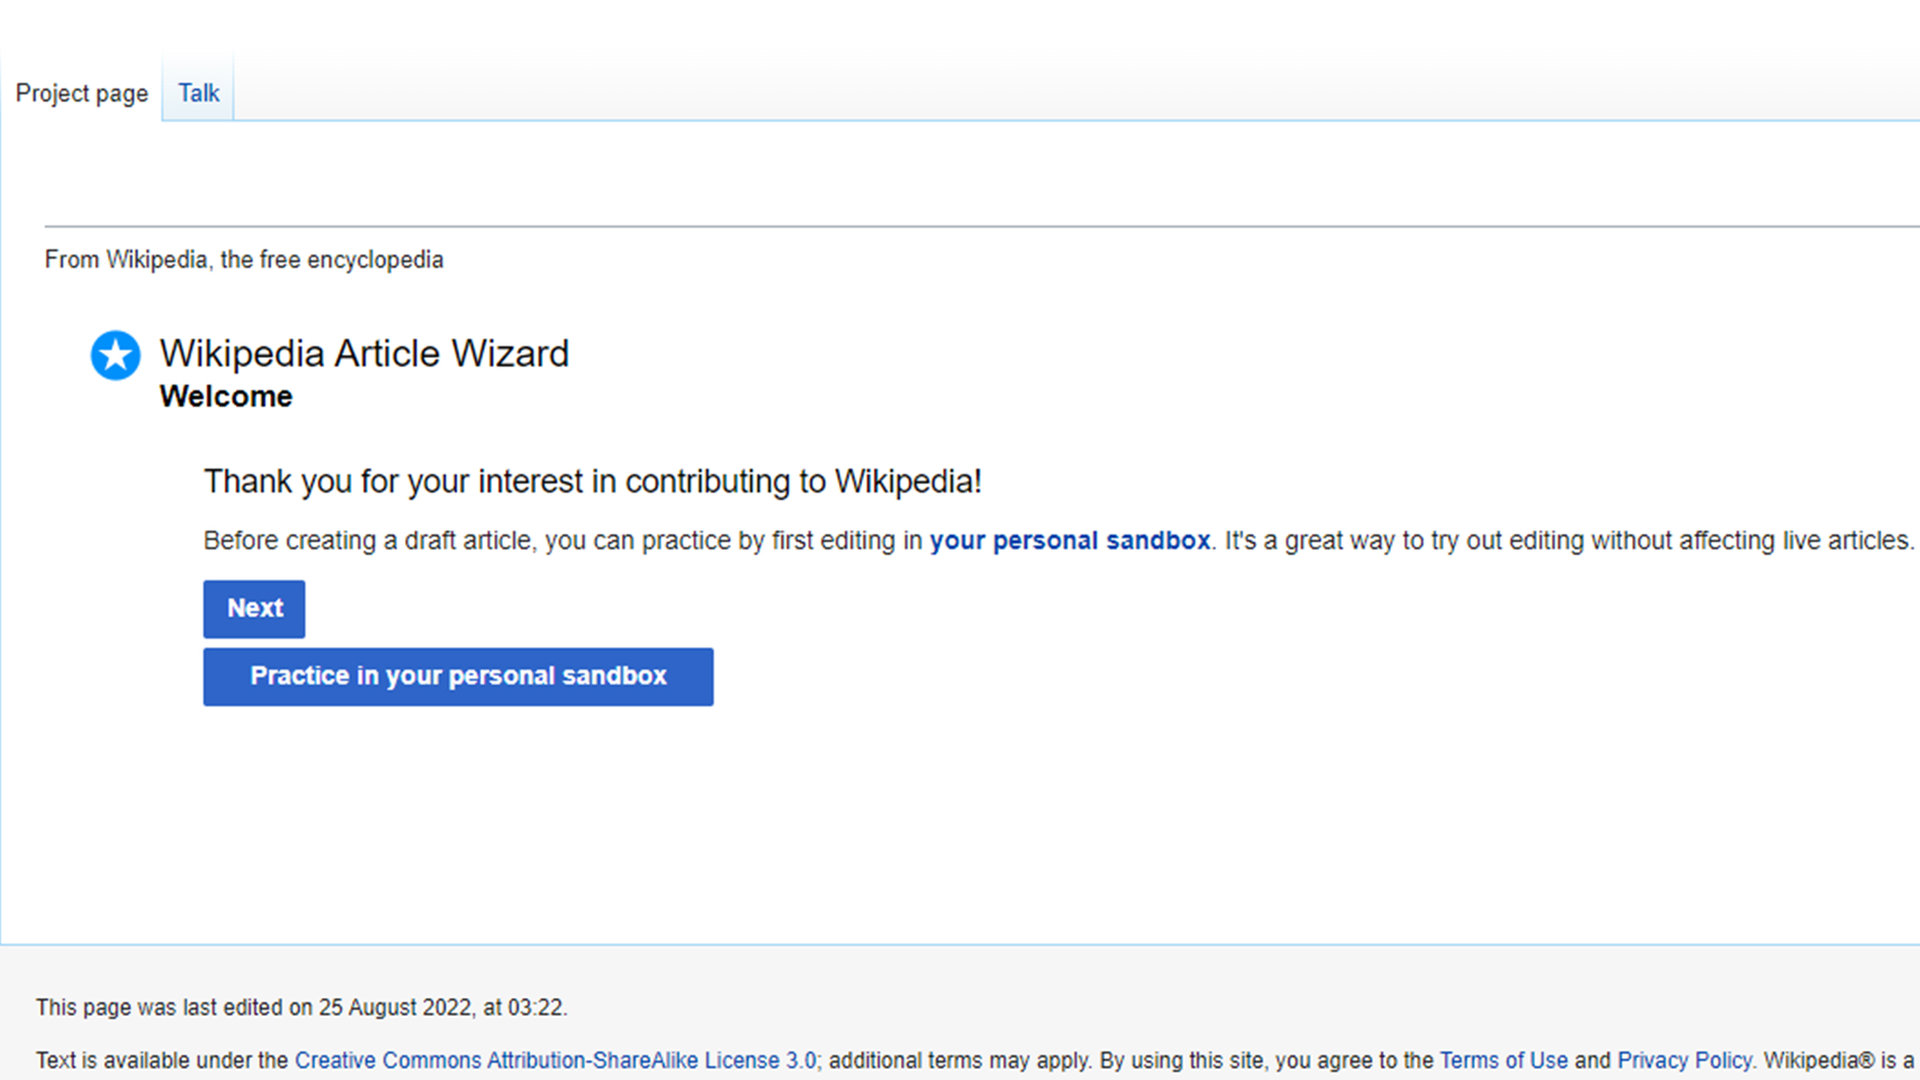 Wikipedia Article Wizard Page